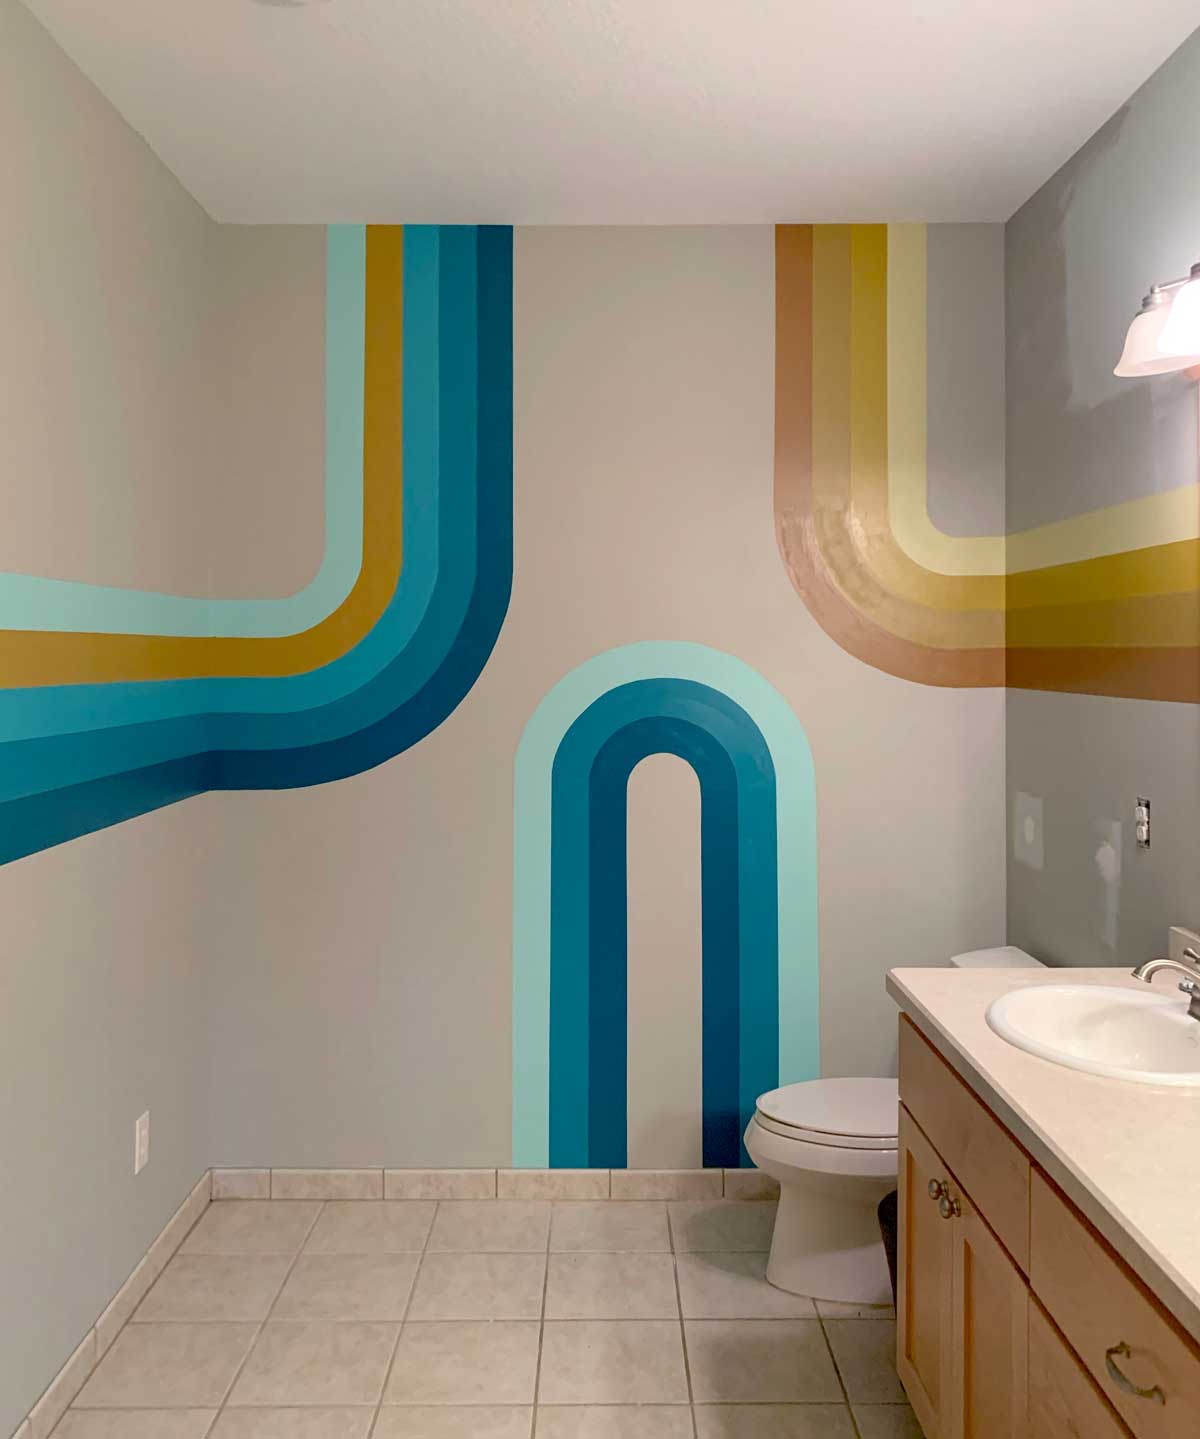 Our curvy bathroom mural + using all the paint during social isolation!